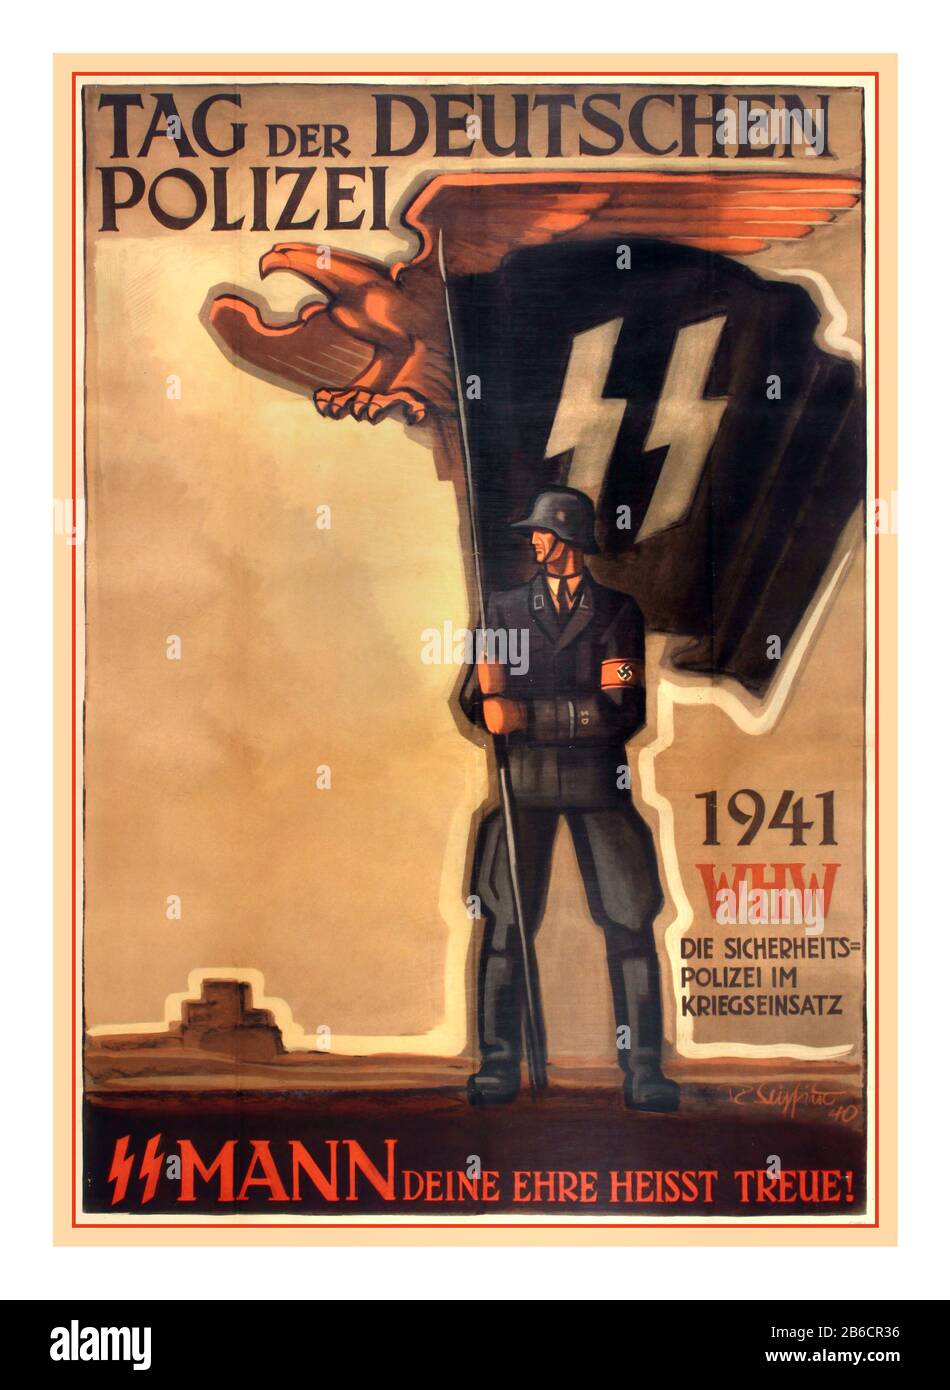 Day of the German Police WW2 vintage German Nazi propaganda poster commemorating the Day of the German Police during the Winterhilfswerk program of 1941. Poster showing  SS soldier holding  SS Banner with eagle, symbol of the German empire, depicted in the background. Text reads: Tag der Deutschen Polizei 1941 WHW die sicherheits polizei im kriegseinsatz Mann Deine ehre heisst treue! Day of the German Police. WHW the security police in war operations. Men, your honor means loyalty. The Schutzstaffel was a major paramilitary organization under Adolf Hitler and the Nazi Party (NSDAP) in Nazi Stock Photo